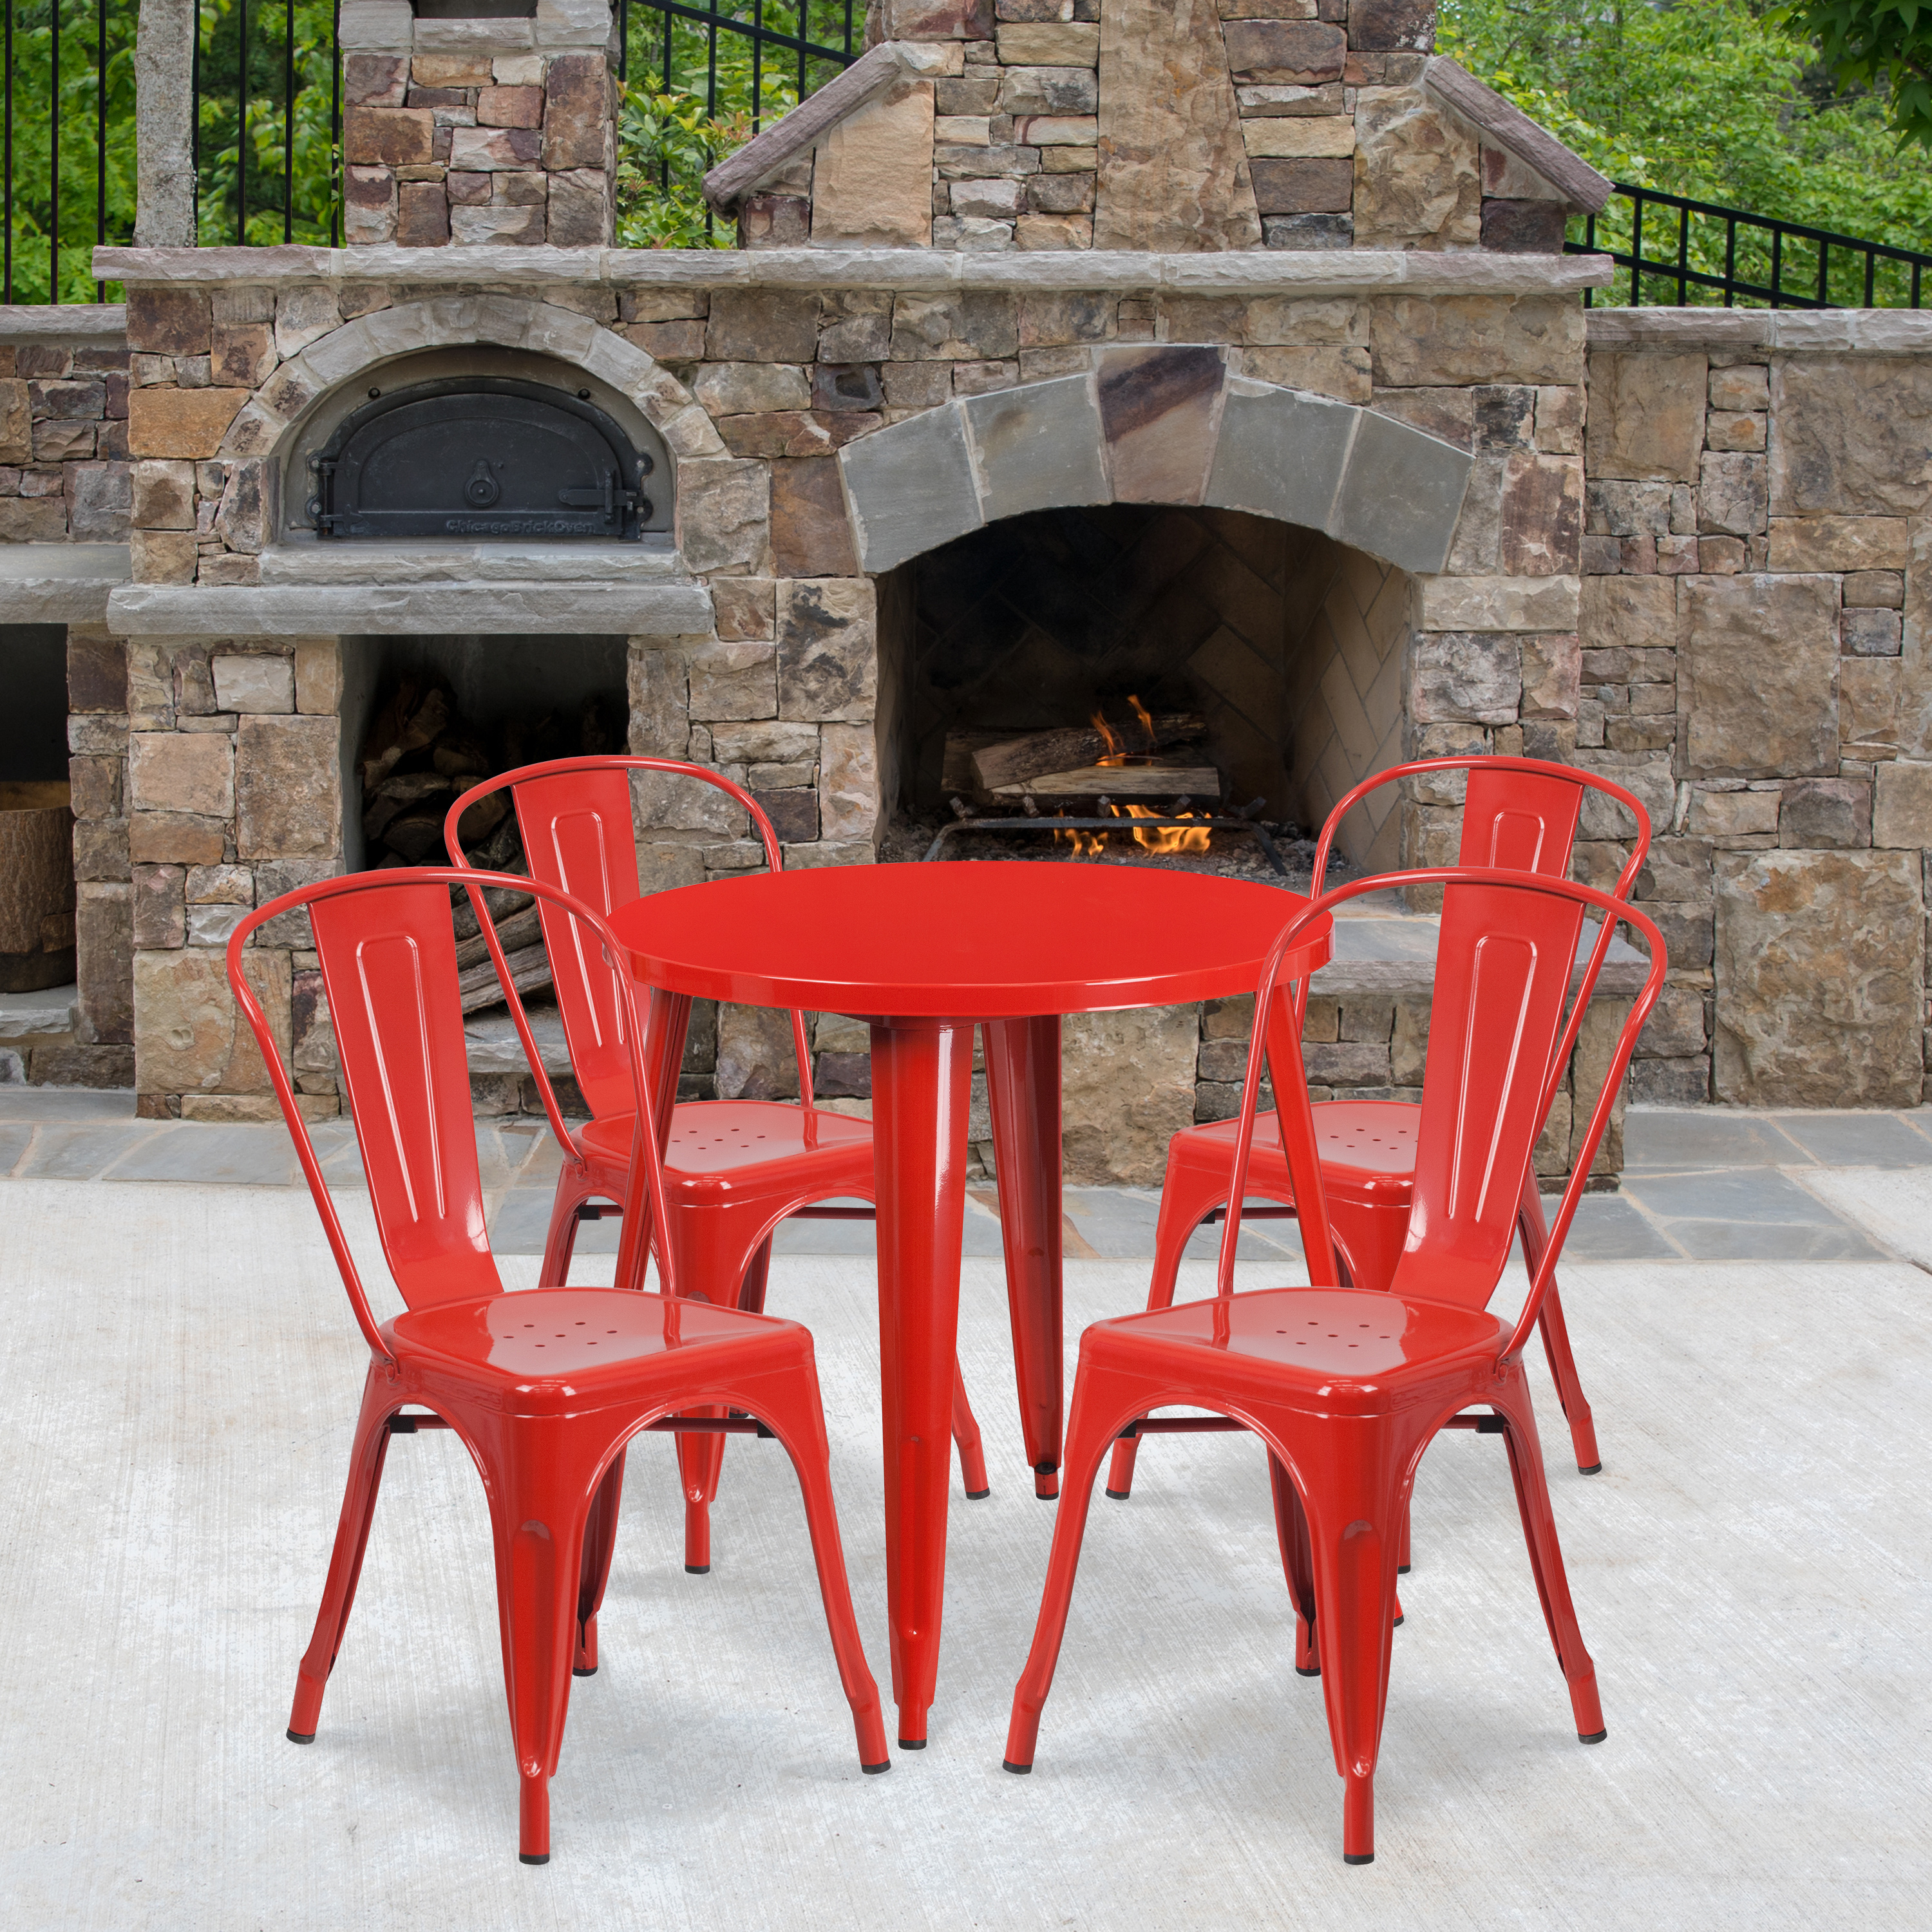 Flash Furniture Commercial Grade 30" Round Red Metal Indoor-Outdoor Table Set with 4 Cafe Chairs - image 1 of 5